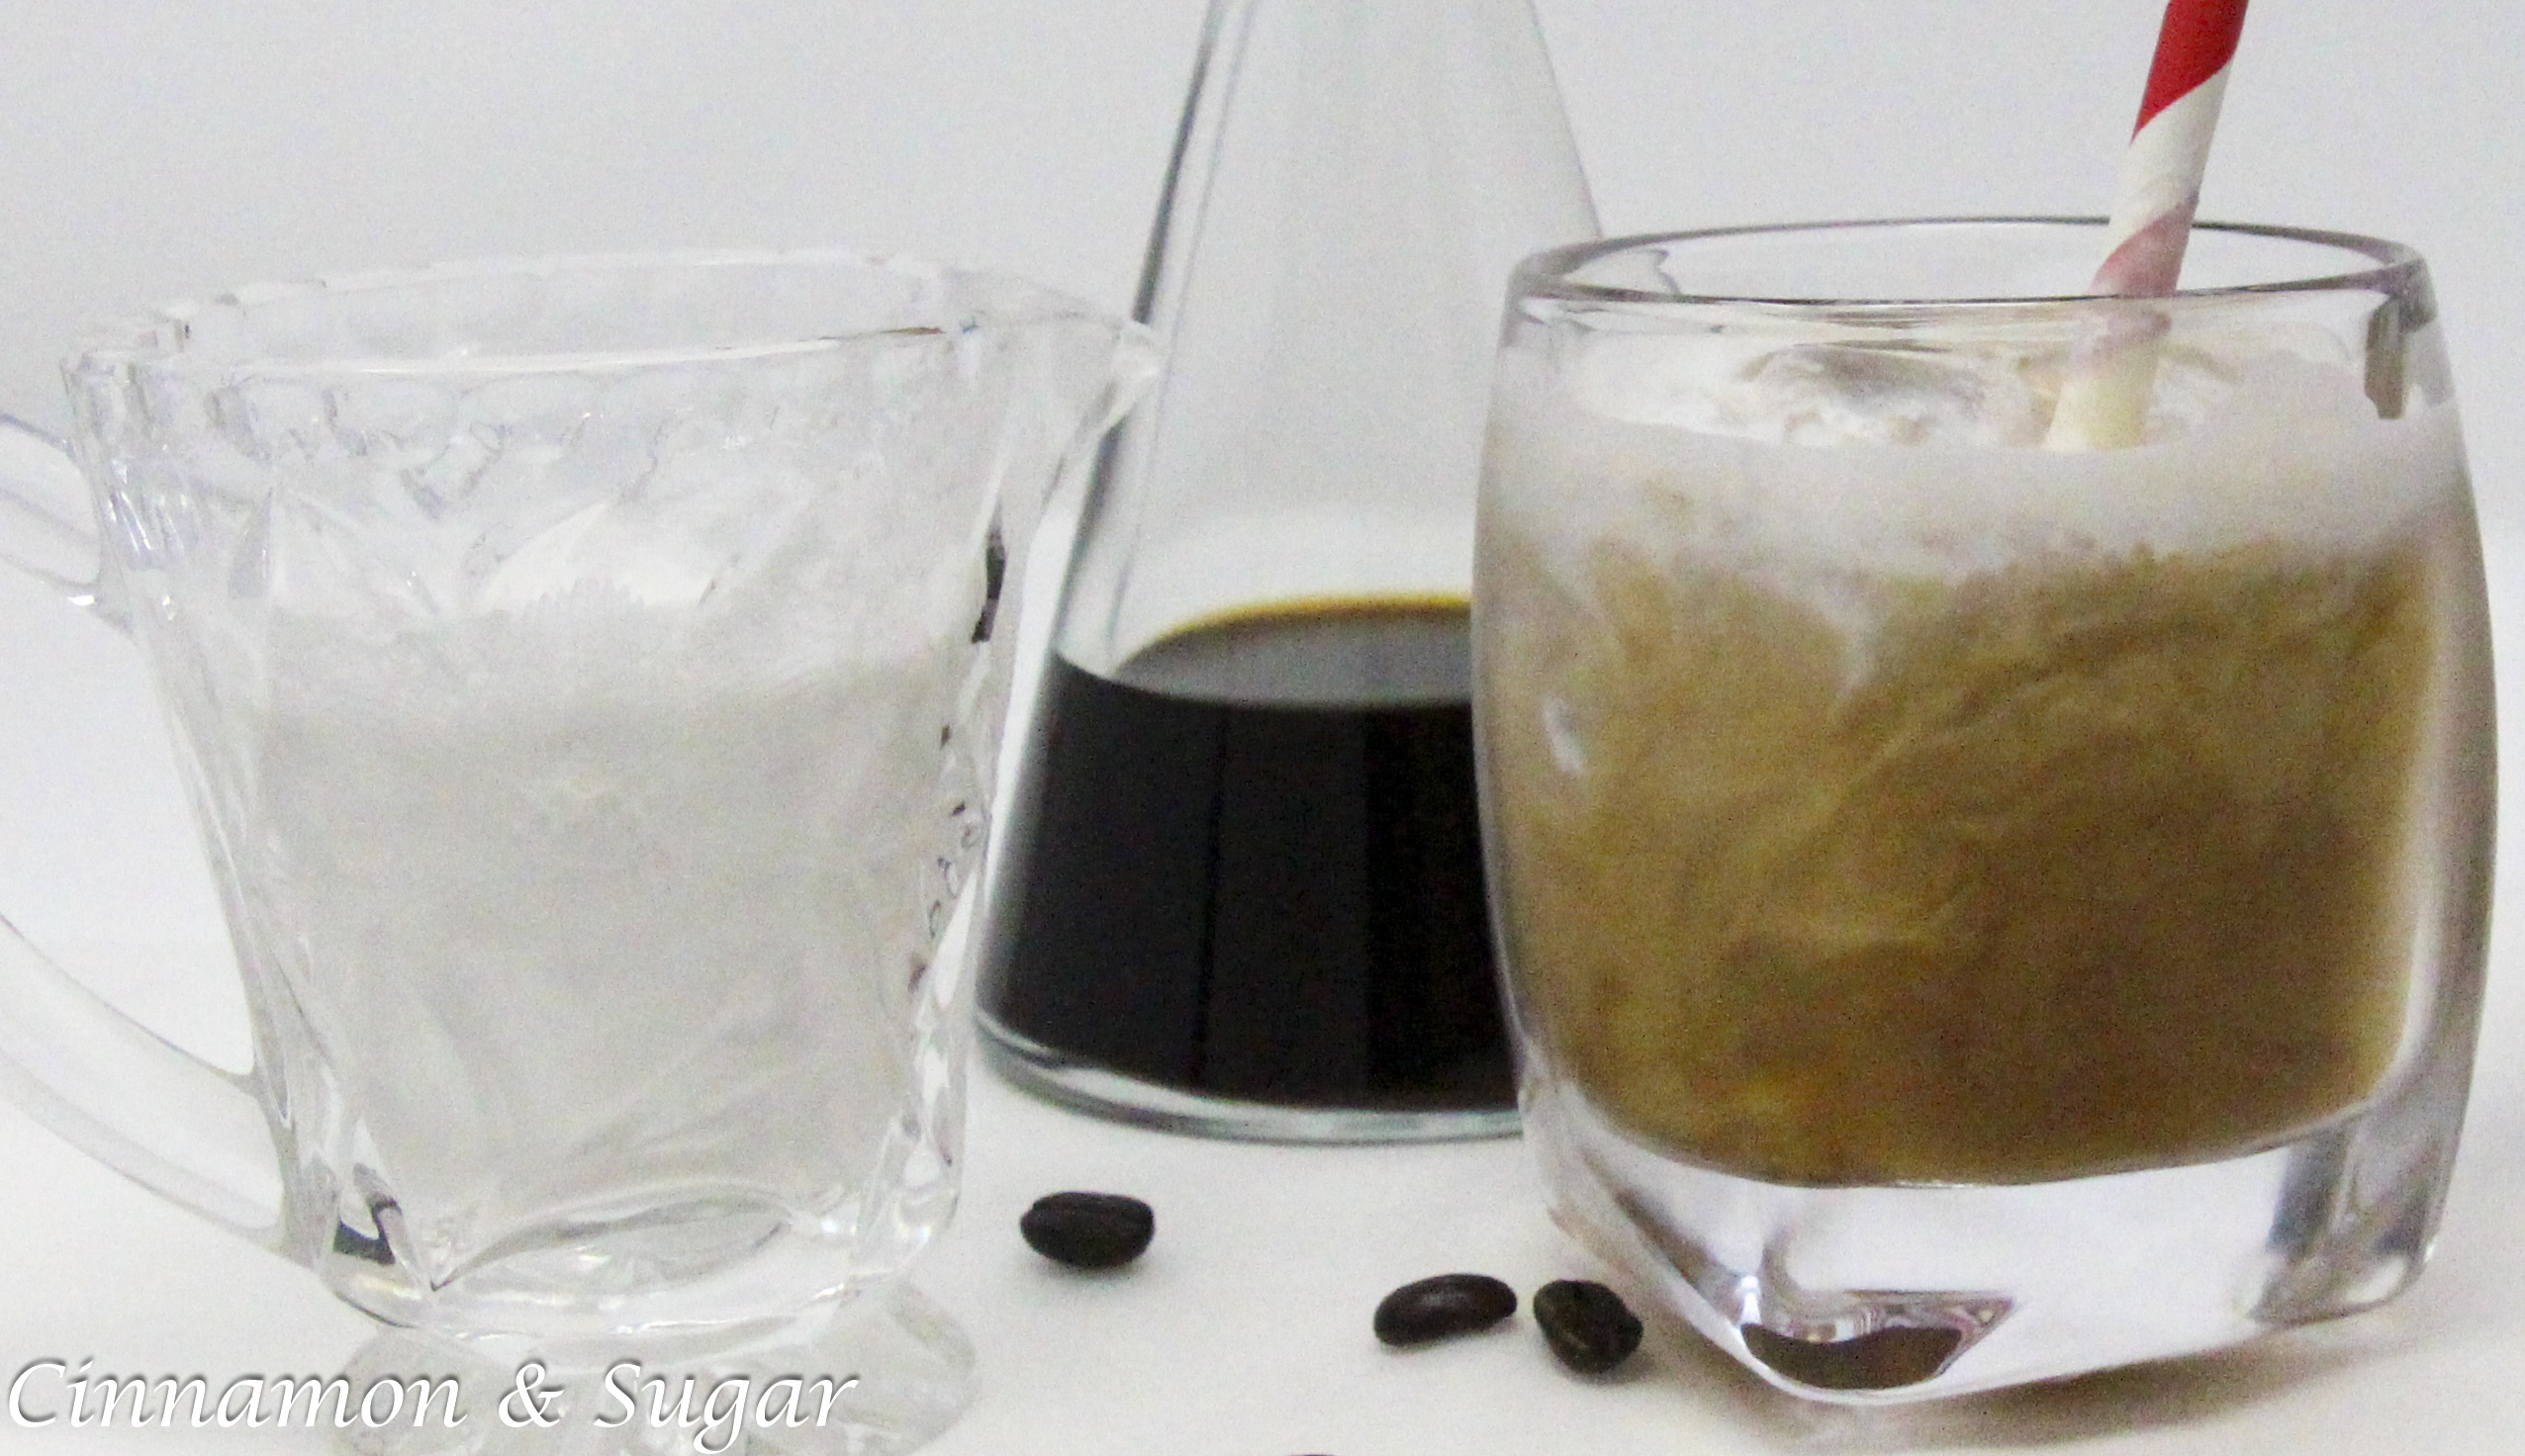 On it's own or as the base for your own fabulous coffee concoction, this cold brew coffee is a smooth, delicious (and oh so easy) way to become your own favorite barista! Recipe shared with permission granted by Tara Lush, author of COLD BREW CORPSE.